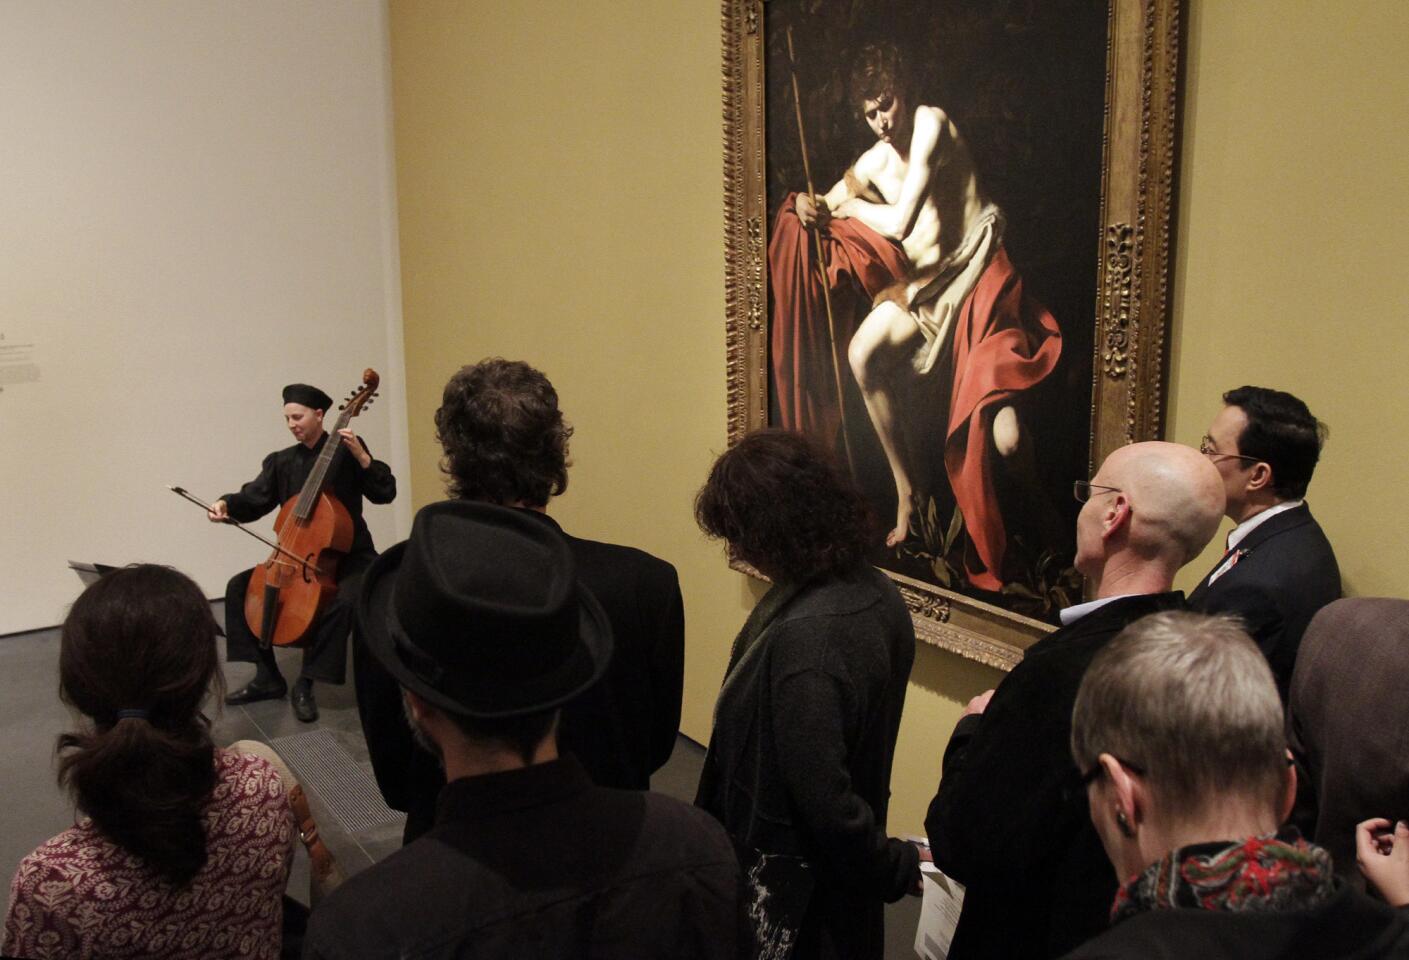 Denise Briese performs Italian baroque music with the viola digamba at the Los Angeles County Museum of Art.